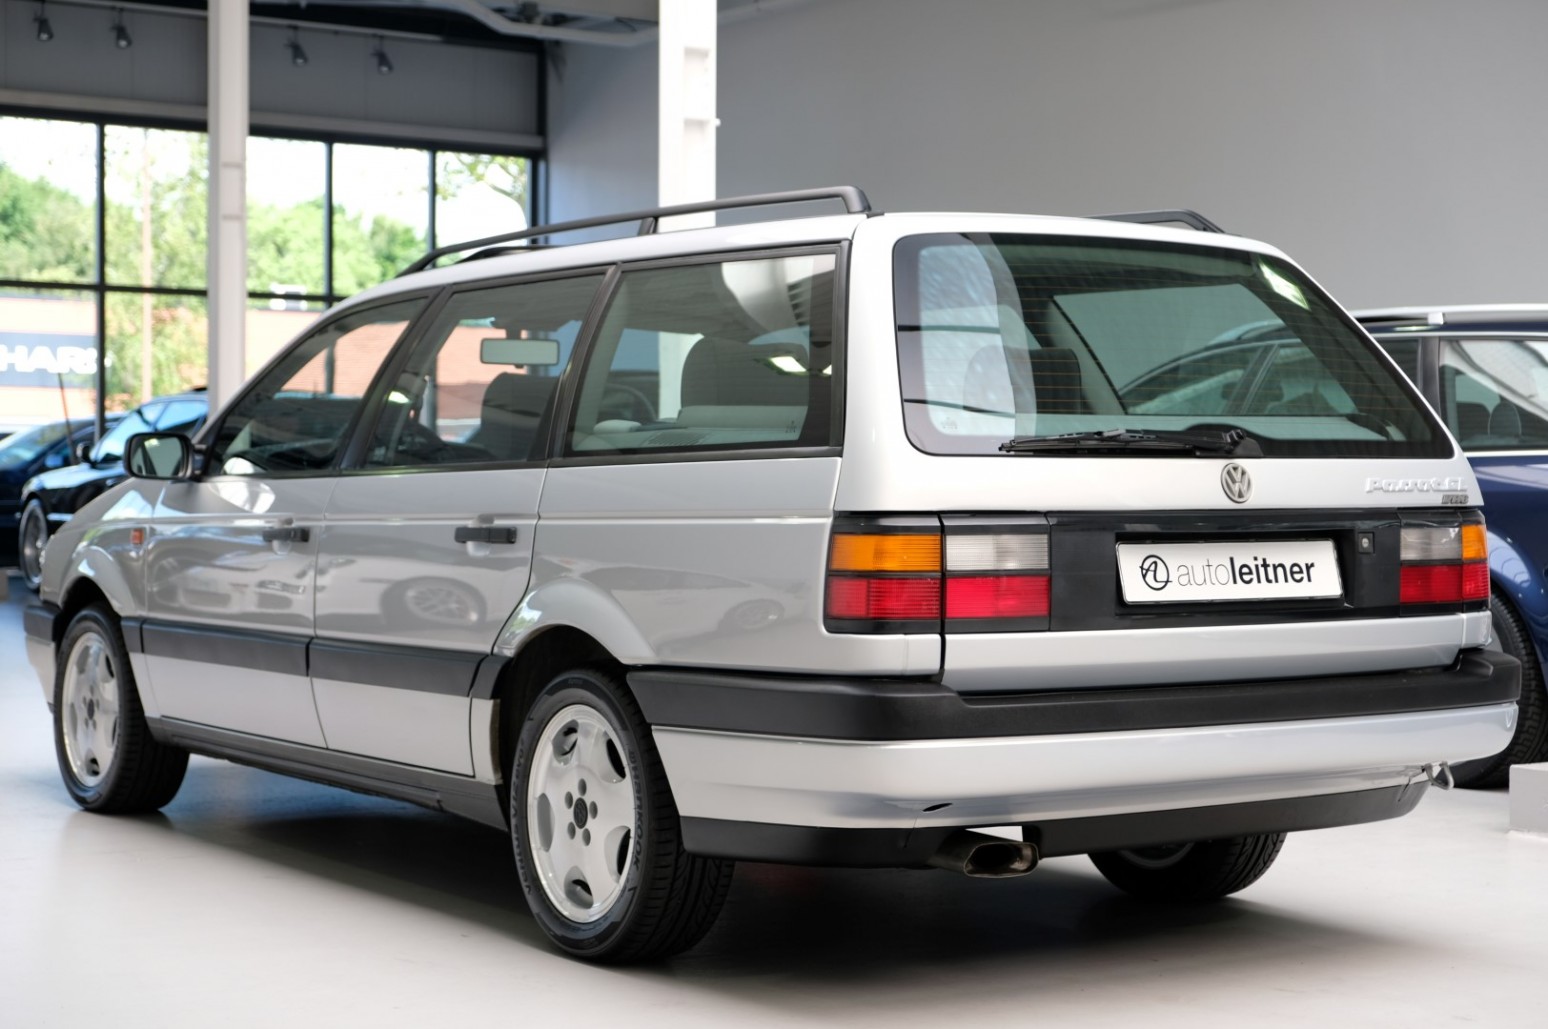 1992 VW Passat Variant 2.8 VR6 Is The Sleeper Wagon You Can Afford | Carscoops1548 x 1029